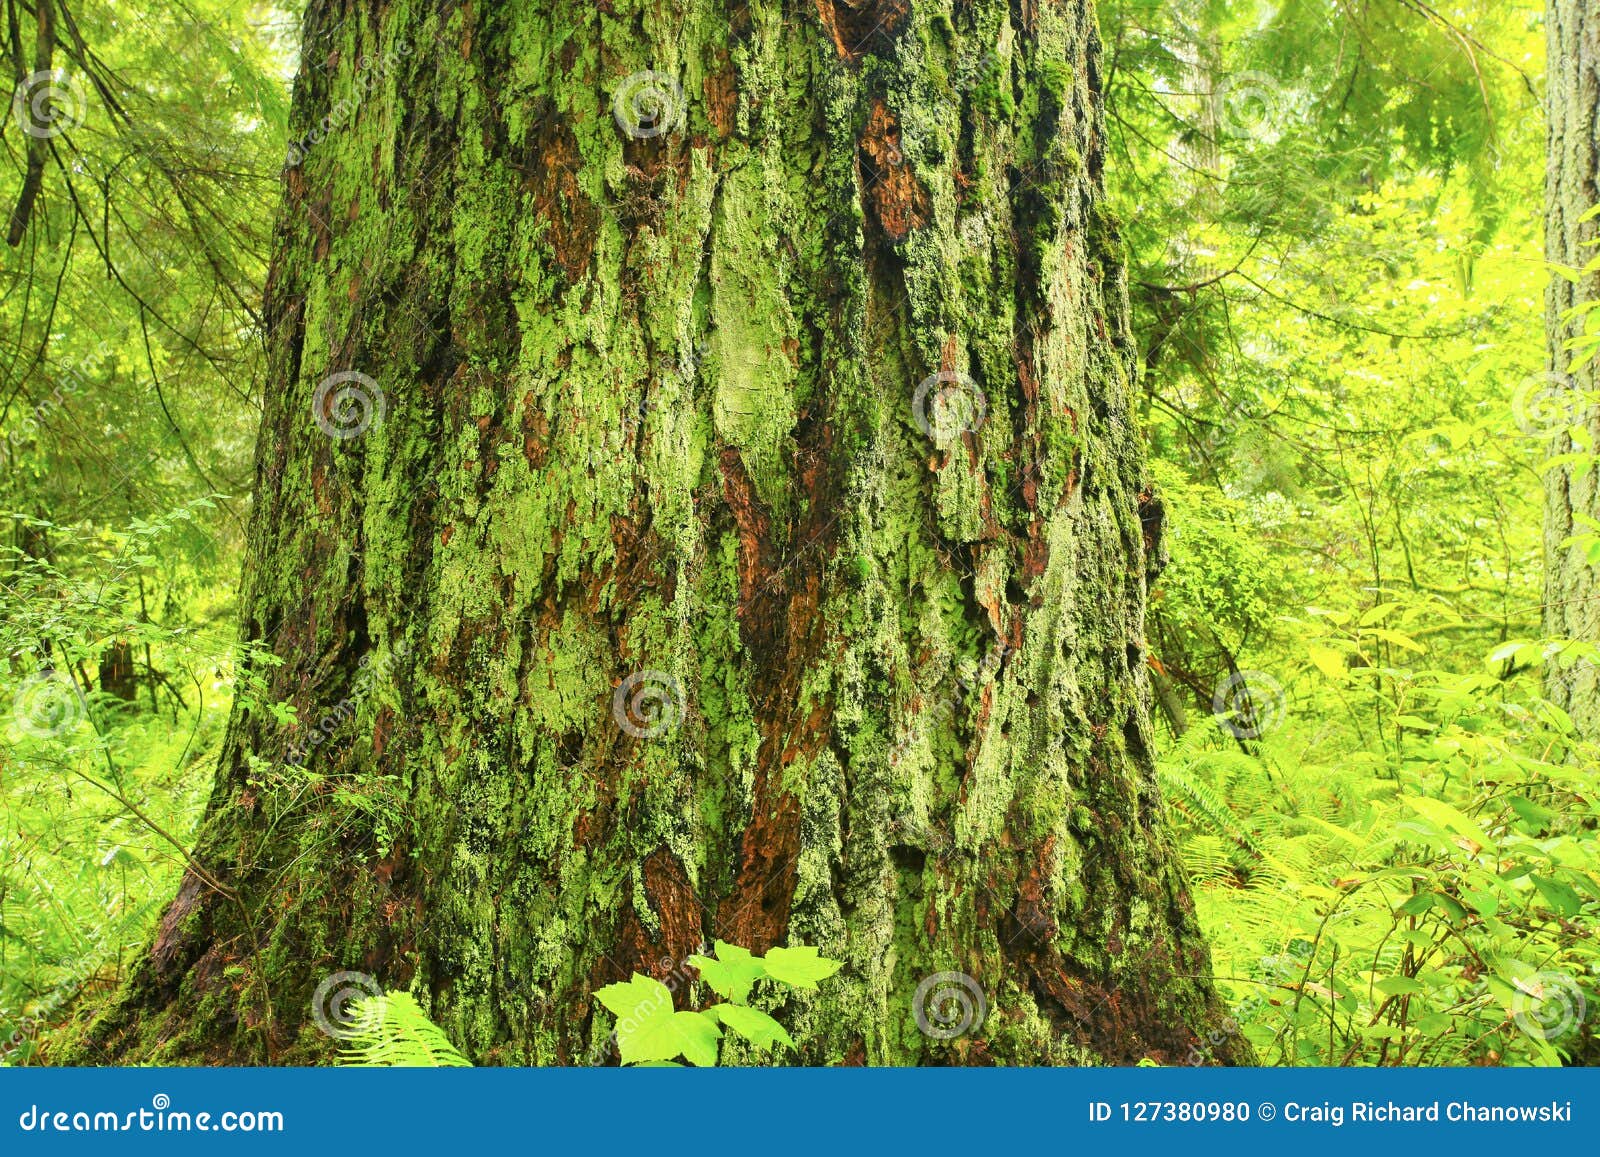 Pacific Northwest Forest And Douglas Fir Trees Stock Photo Image Of Destination Nature 127380980